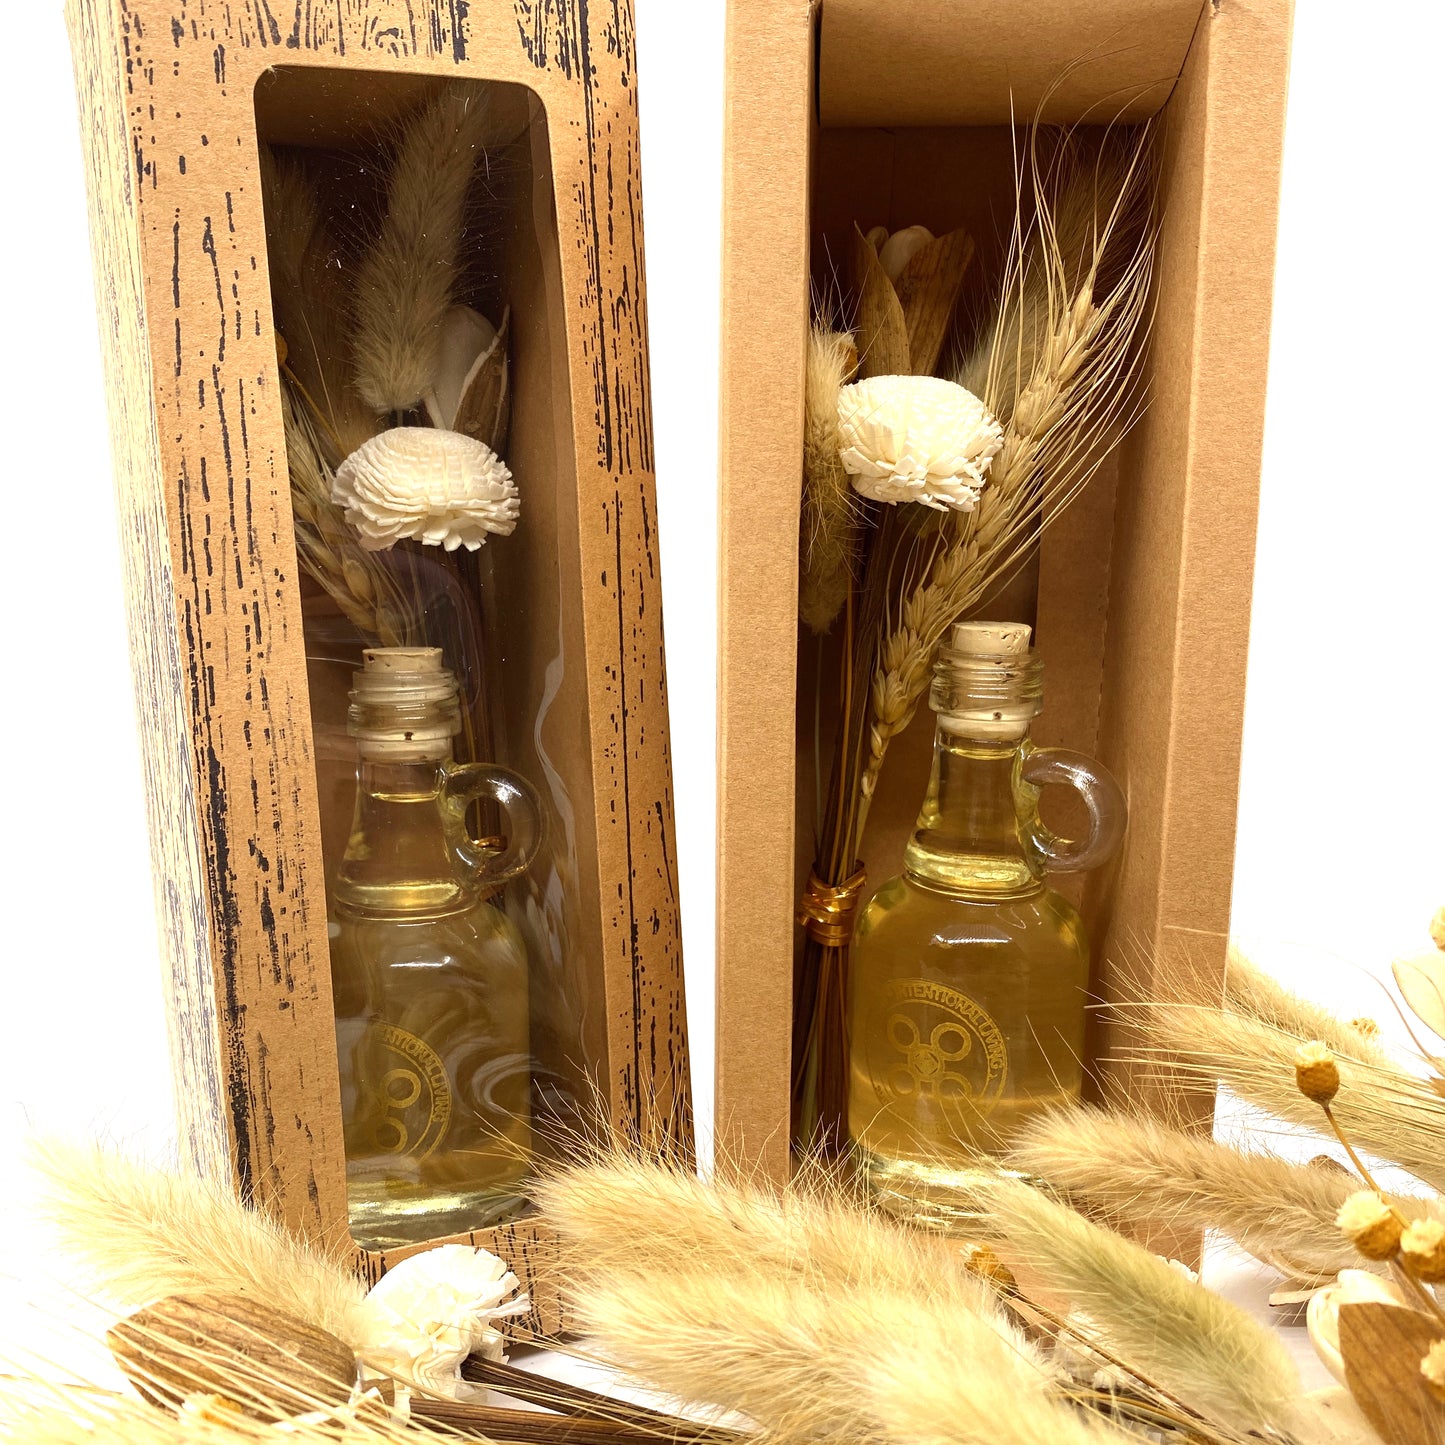 The Great Plains, Rattan Wood Flower, Reed Diffuser 40 ml